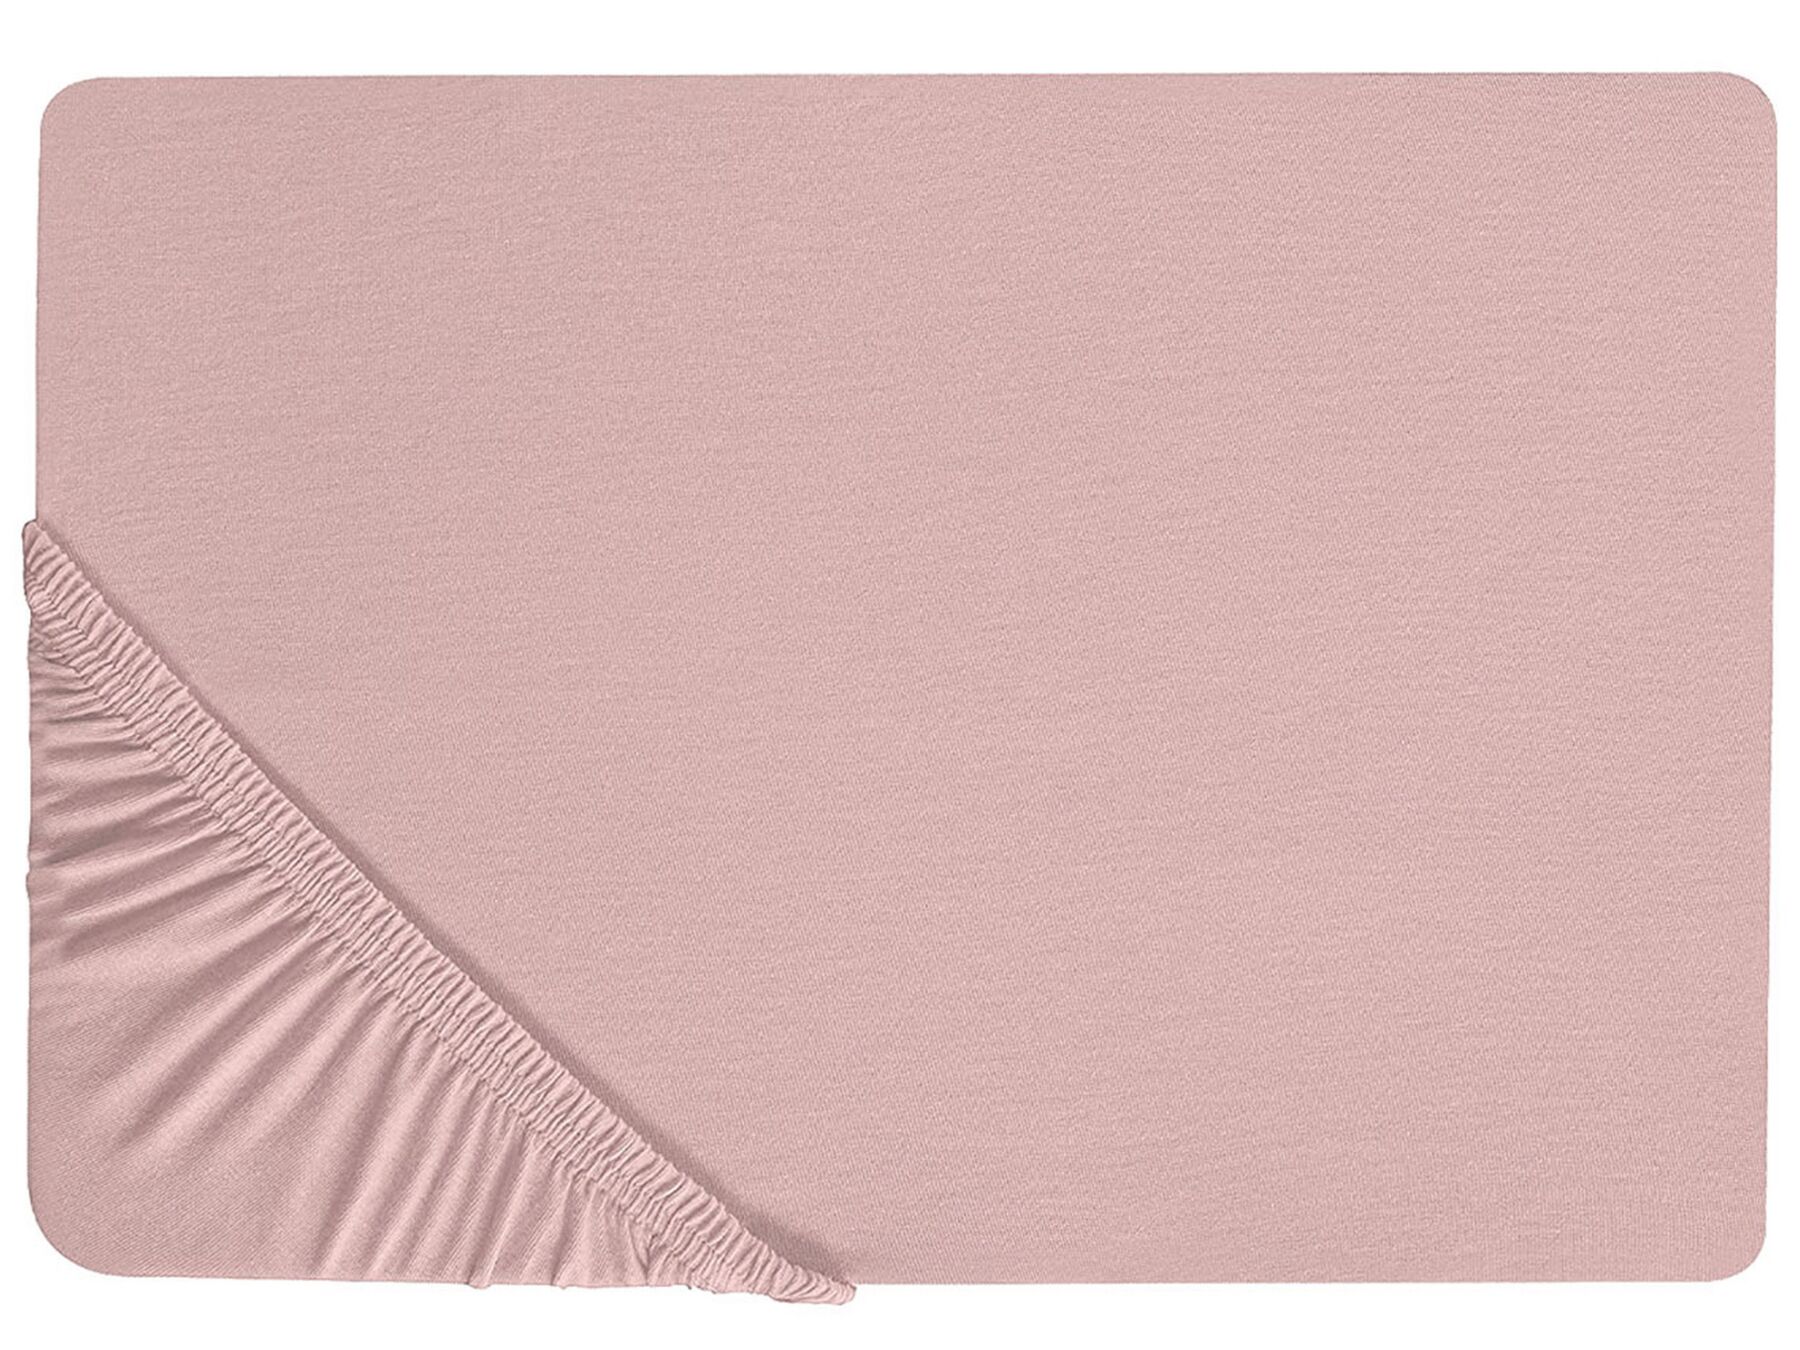 Cotton Fitted Sheet 160 x 200 cm Pink HOFUF_815909